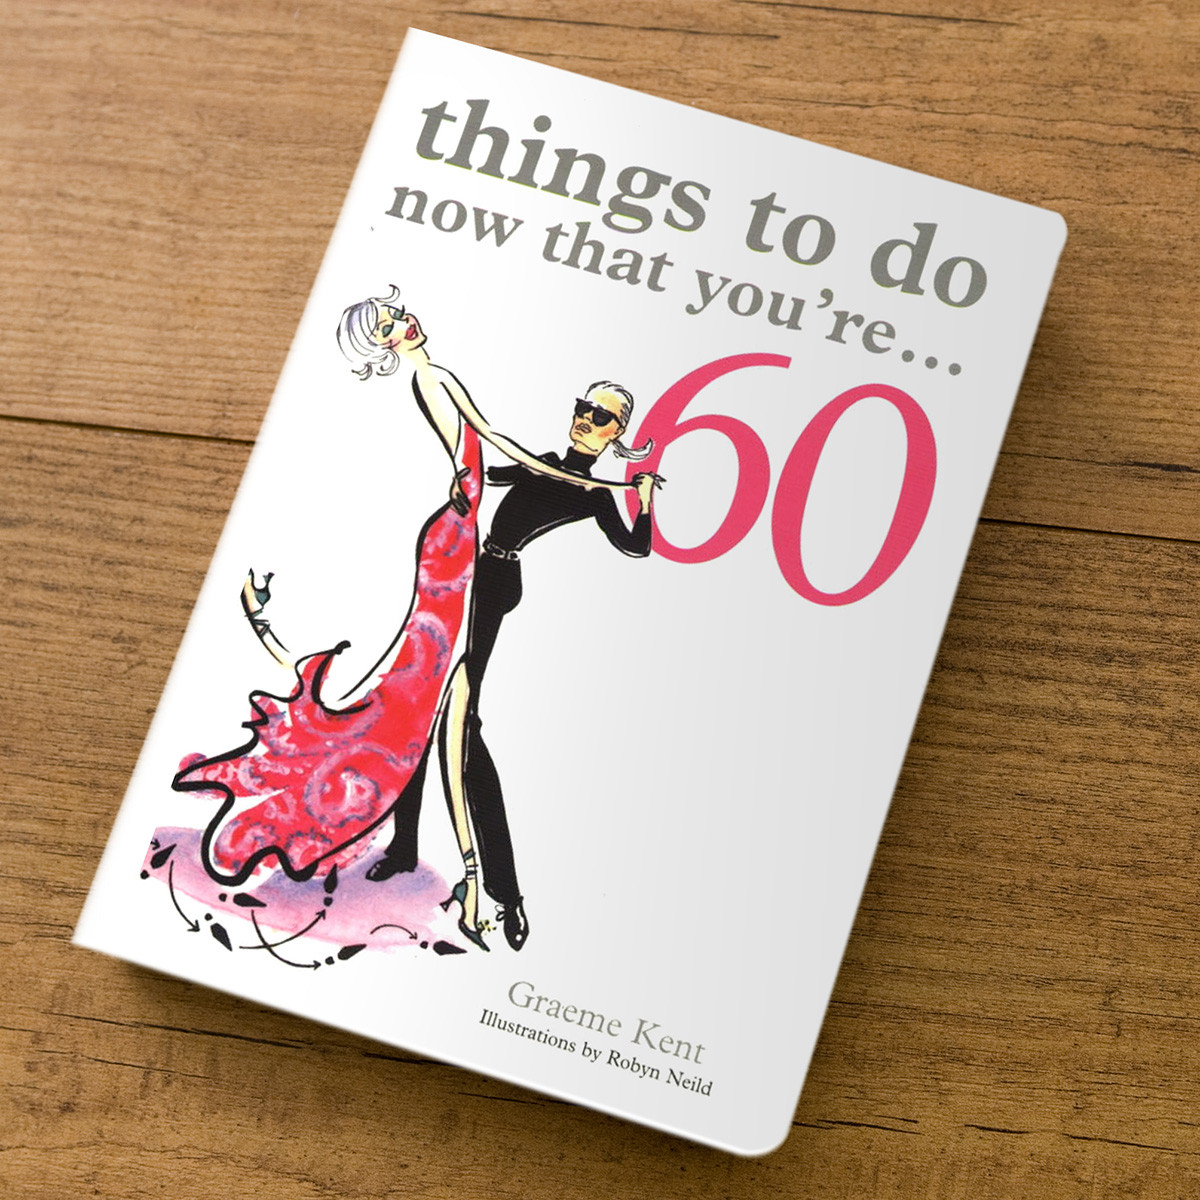 Gifts For 60th Birthday
 Things To Do Now That You re 60 Gift Book 60th